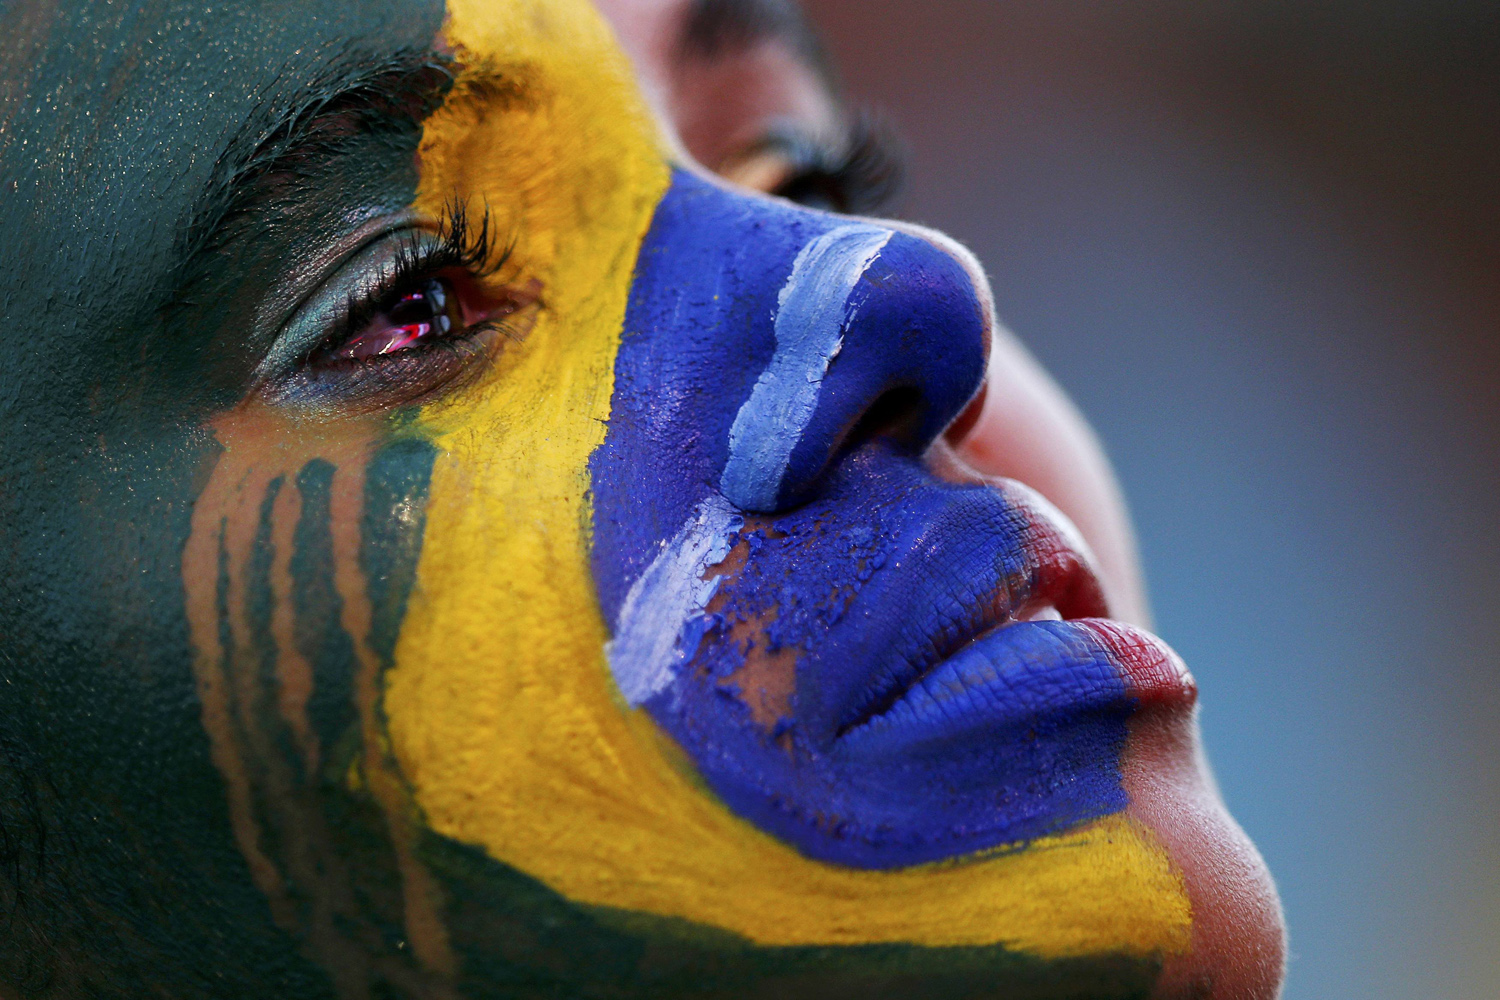 A Brazil fan cries as she watches the 2014 World Cup semi-final between Brazil and Germany at a fan area in Brasilia